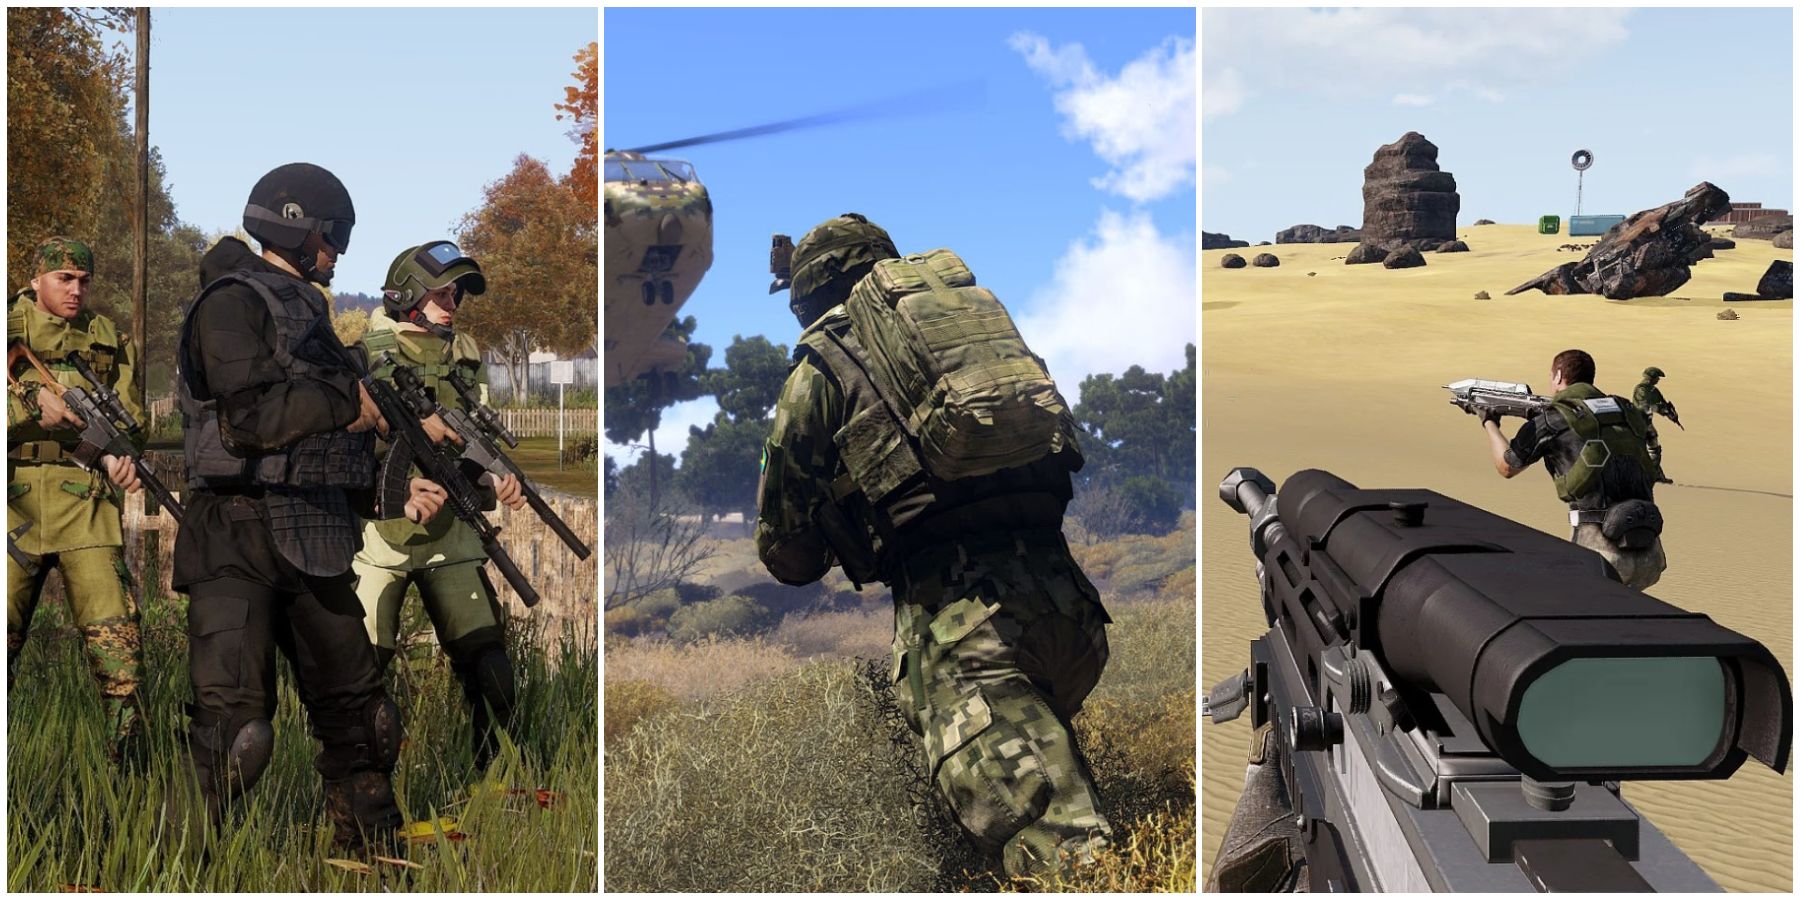 Arma 3, the realistic military sim, is free to play through this weekend